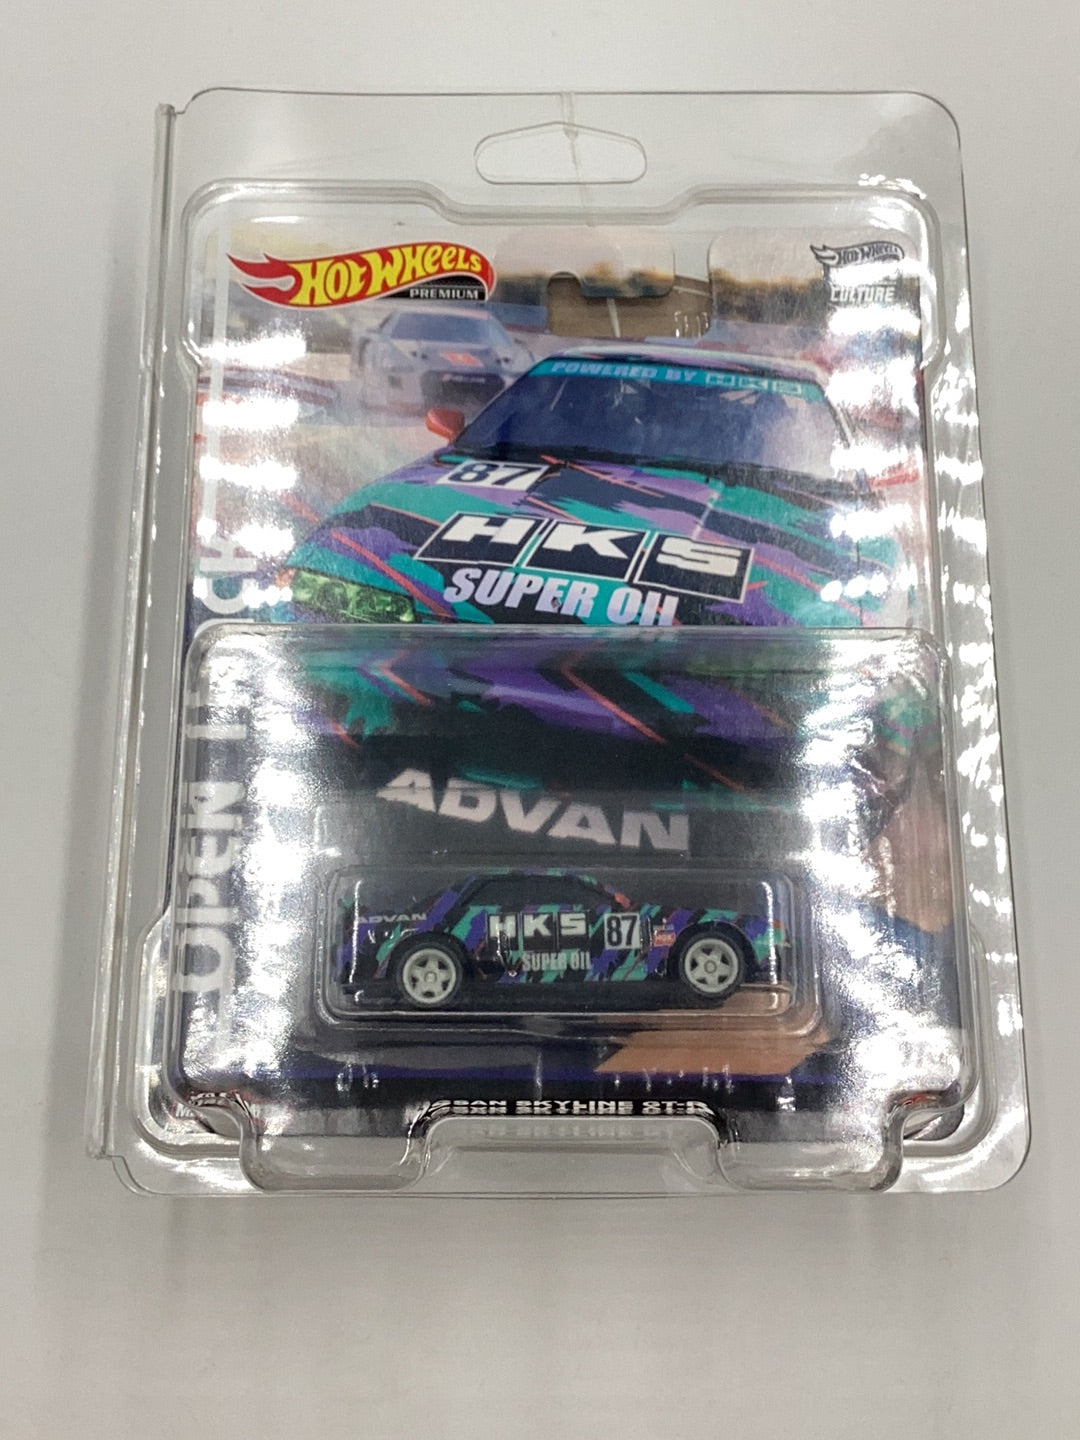 Hot wheels Car Culture Open Track #1 Nissan Skyline GT-R HKS with protector